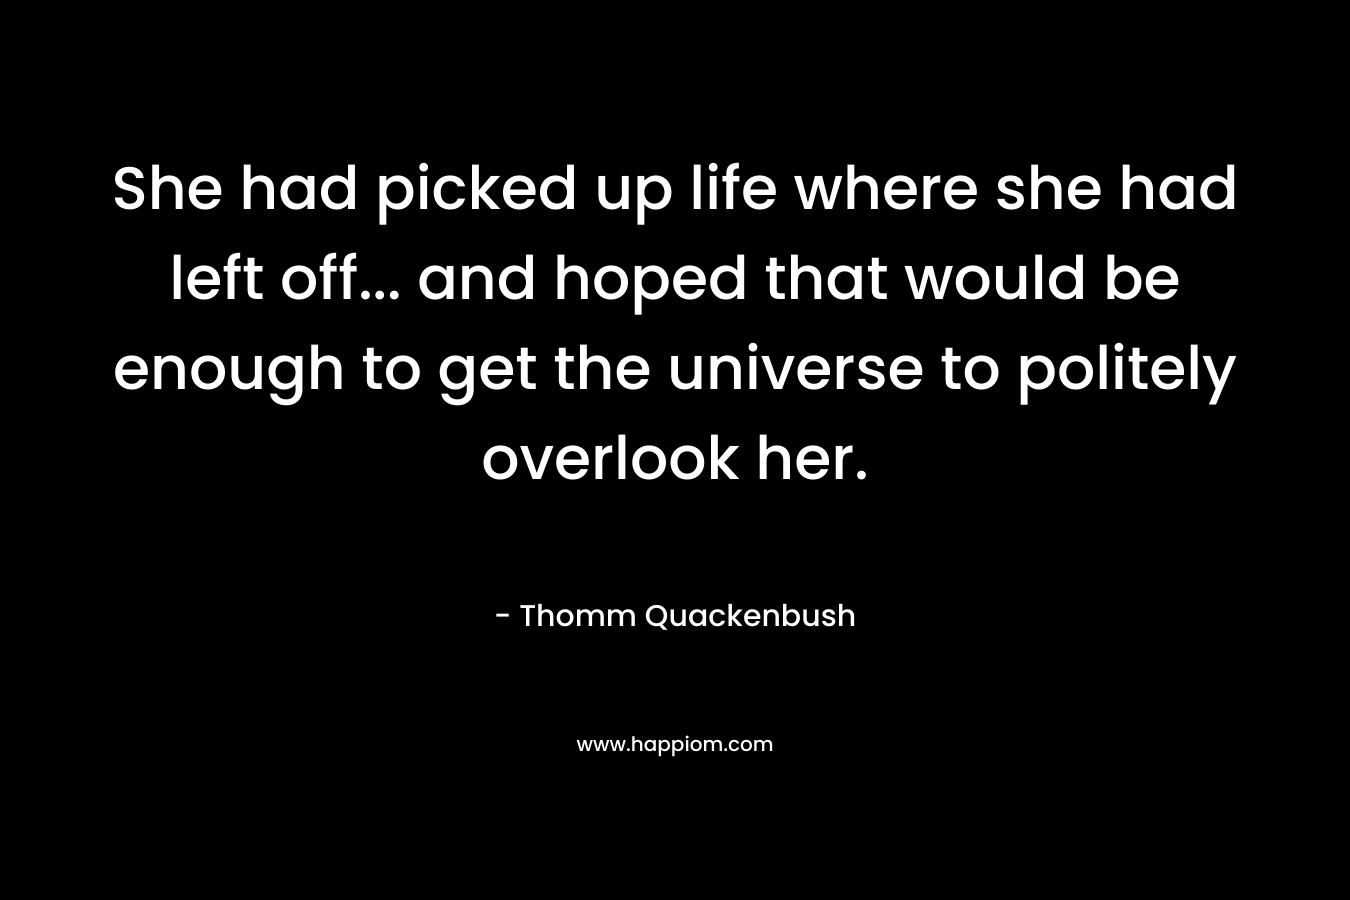 She had picked up life where she had left off… and hoped that would be enough to get the universe to politely overlook her. – Thomm Quackenbush